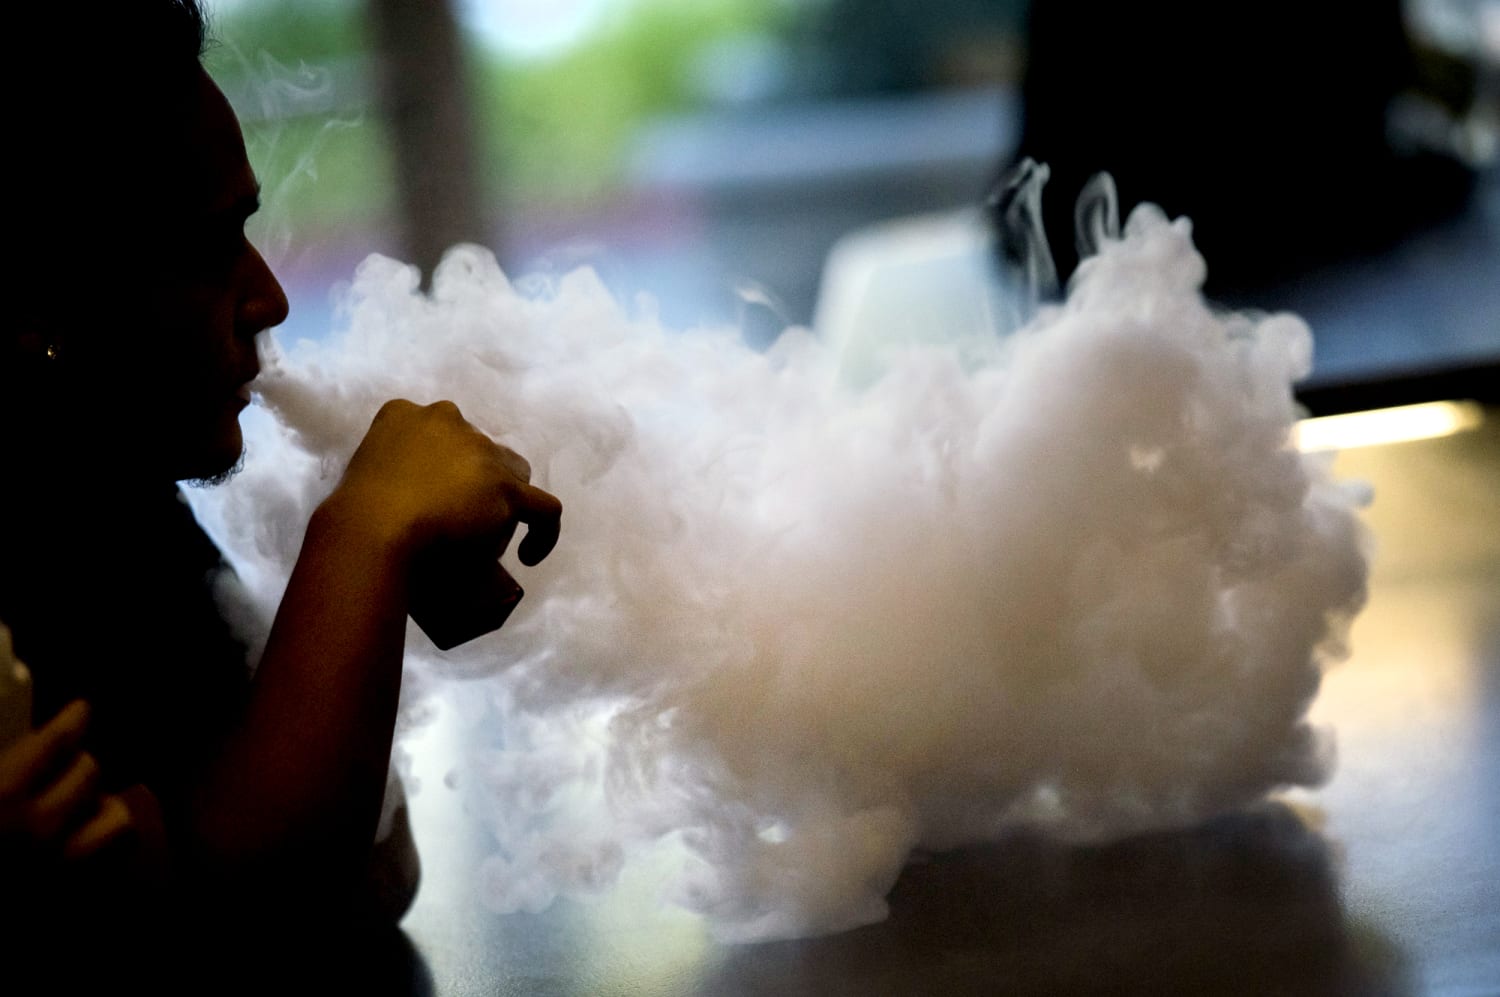 Vaping Illnesses Rise And The Number Of Young Kids Vaping Soars